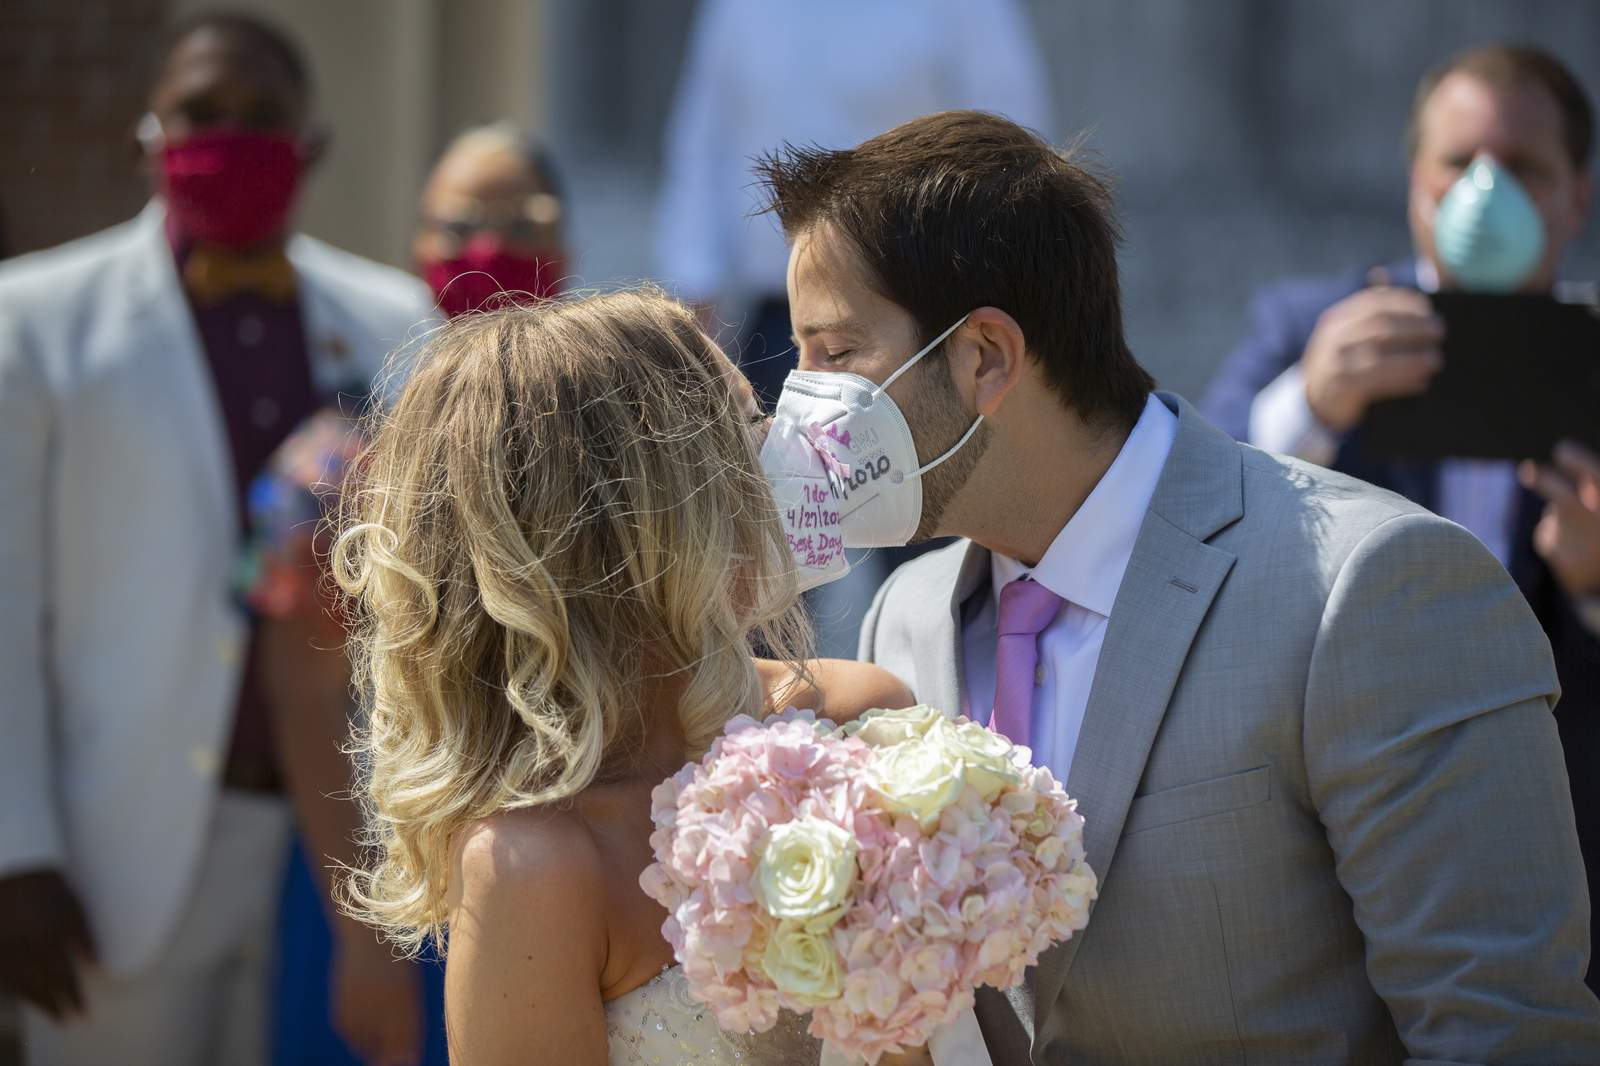 Some Texas weddings during COVID-19 era are ‘germ-infested,’ not lovey-dovey, photographers say